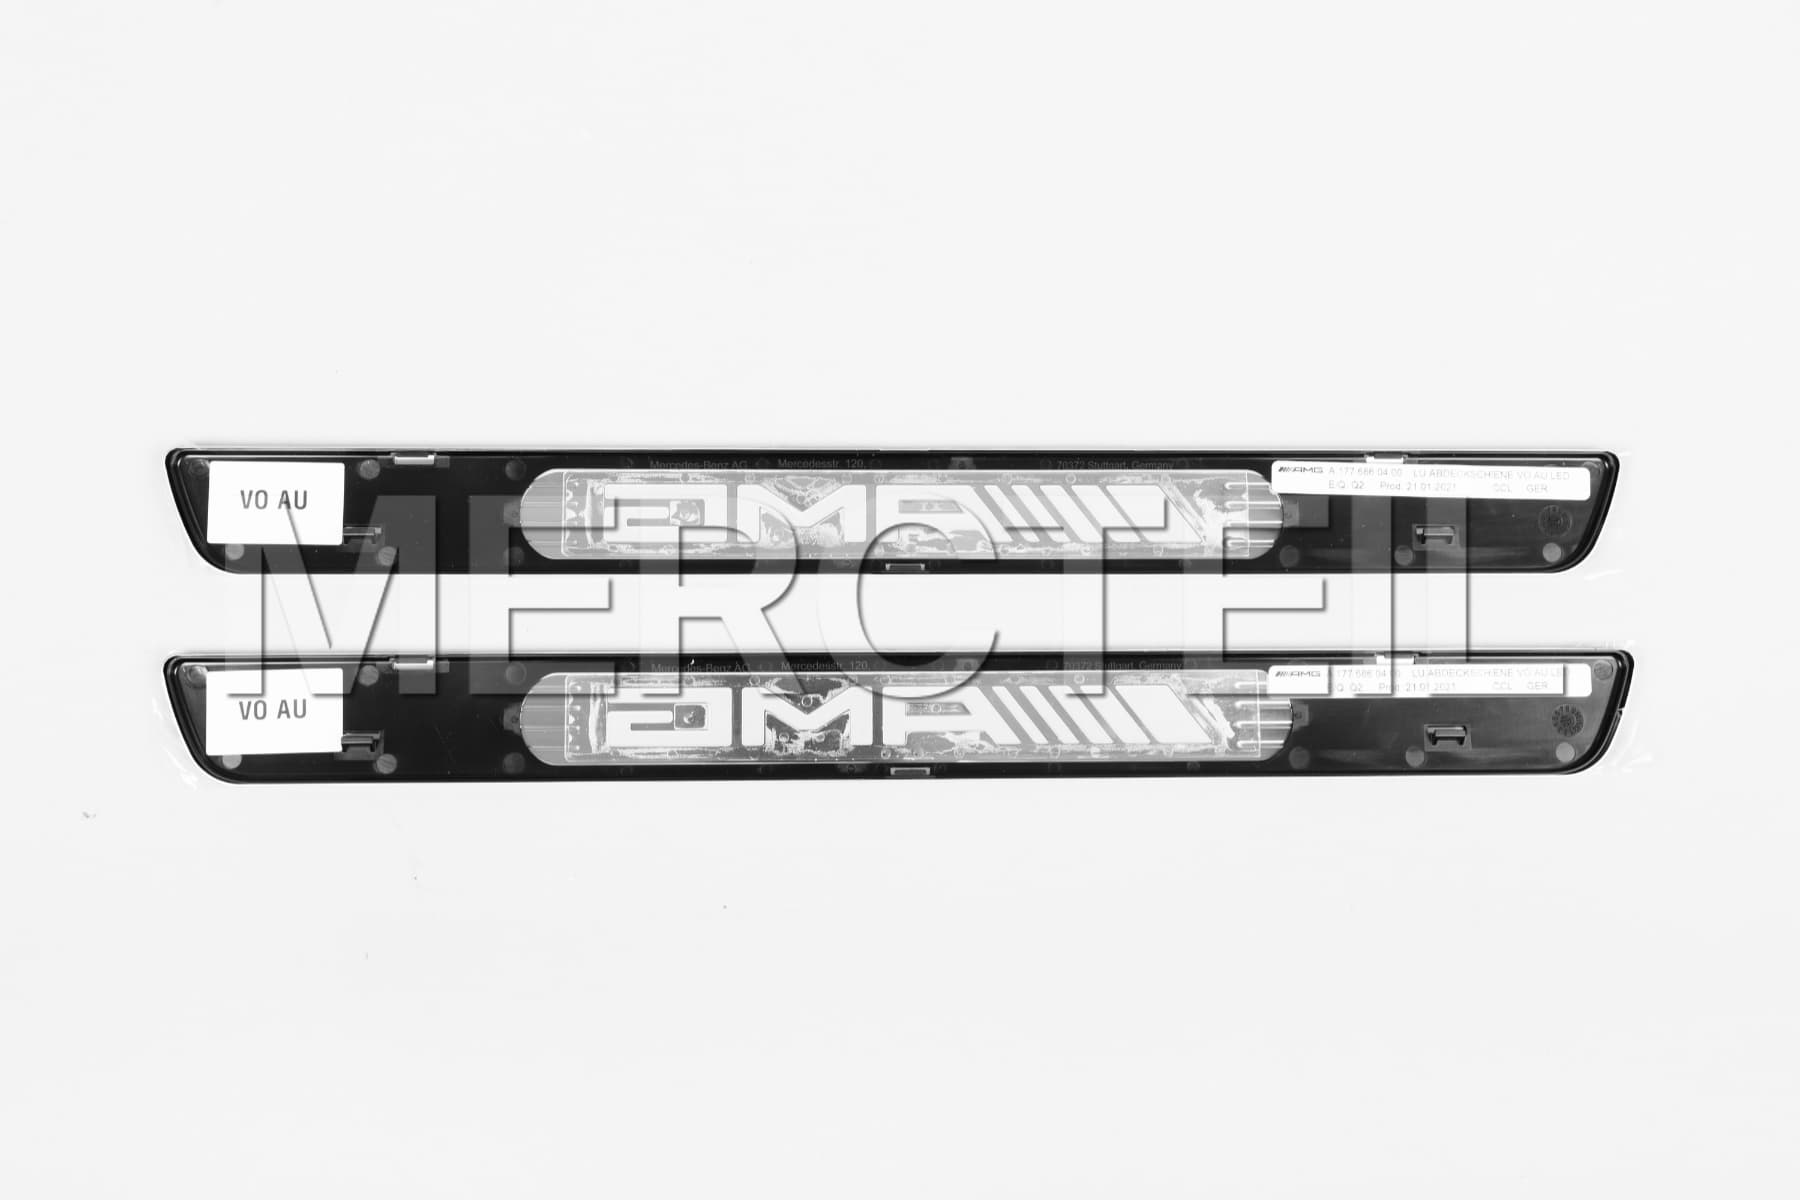 AMG Exchangeable Silver Covers for Illuminated Door Sills Genuine Mercedes AMG (part number: A1776804307)